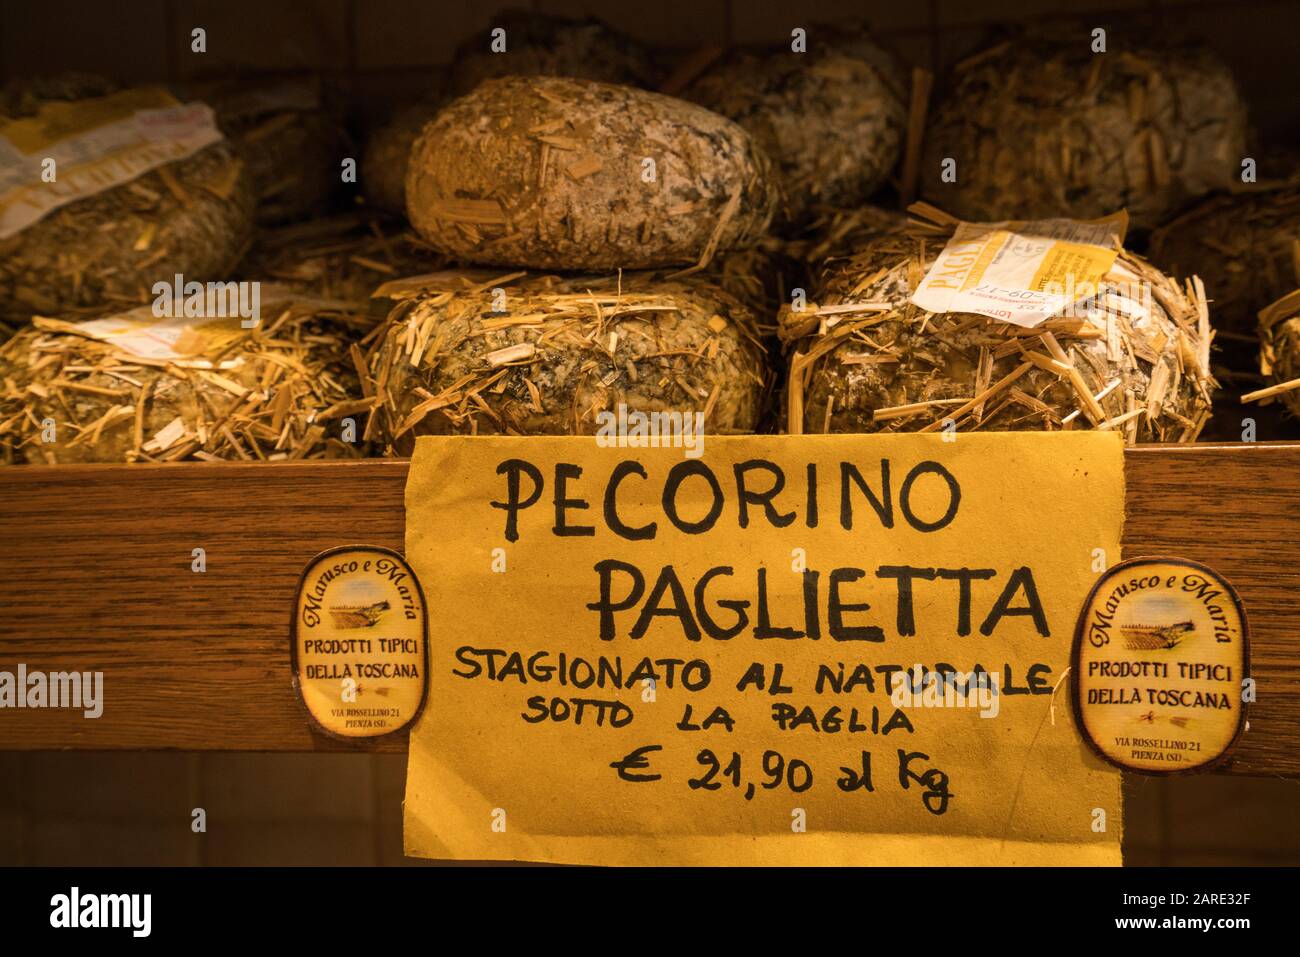 Pienza, Italy - Pecorino sheep cheese aged between 10-20 days for sale in a shop in the medieval vlilage of Pienza, Tuscany Stock Photo